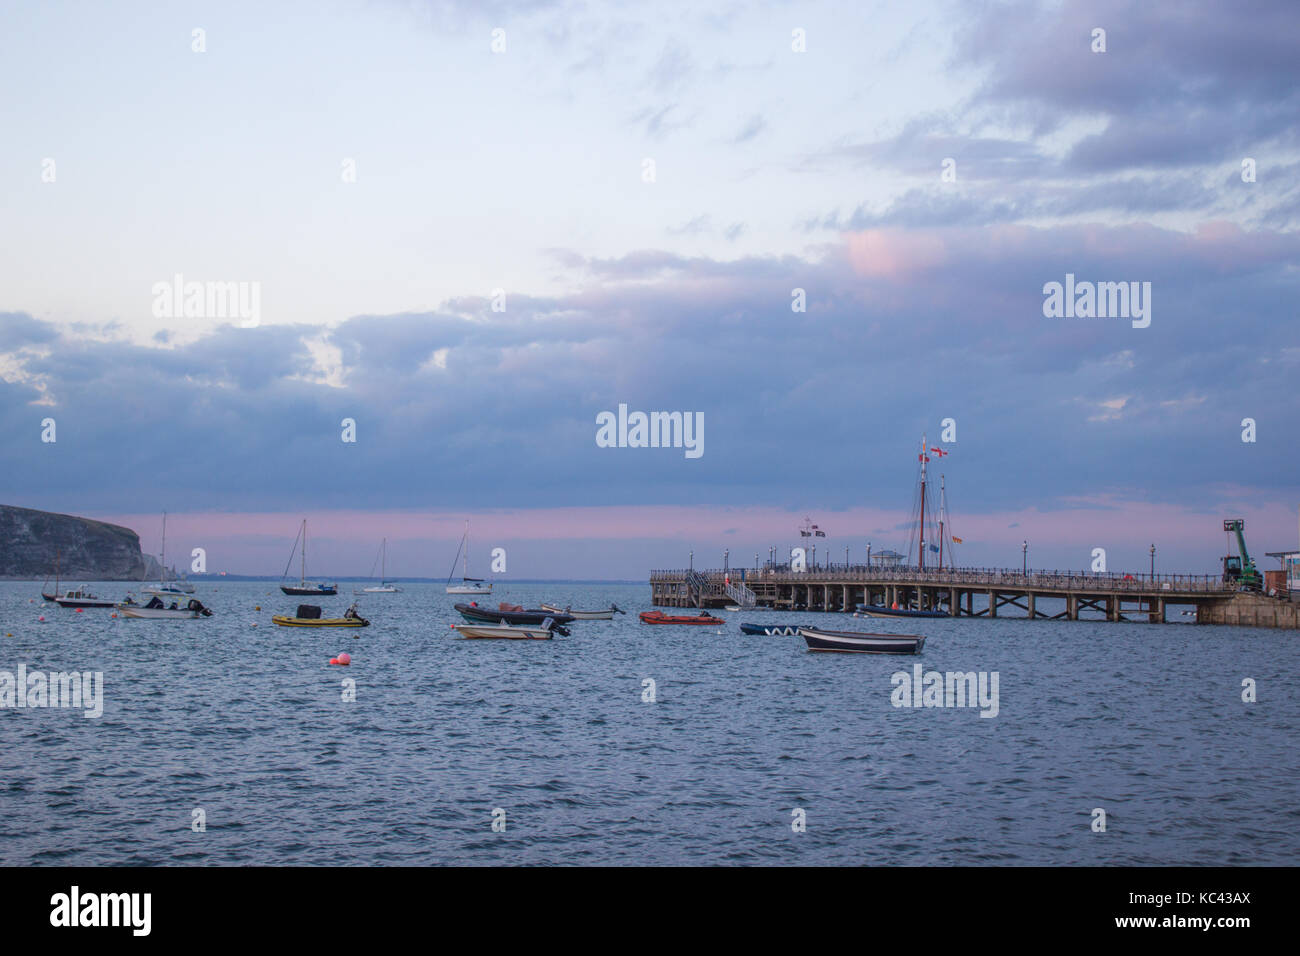 Seaview on swanage pier, sea with several boats Stock Photo